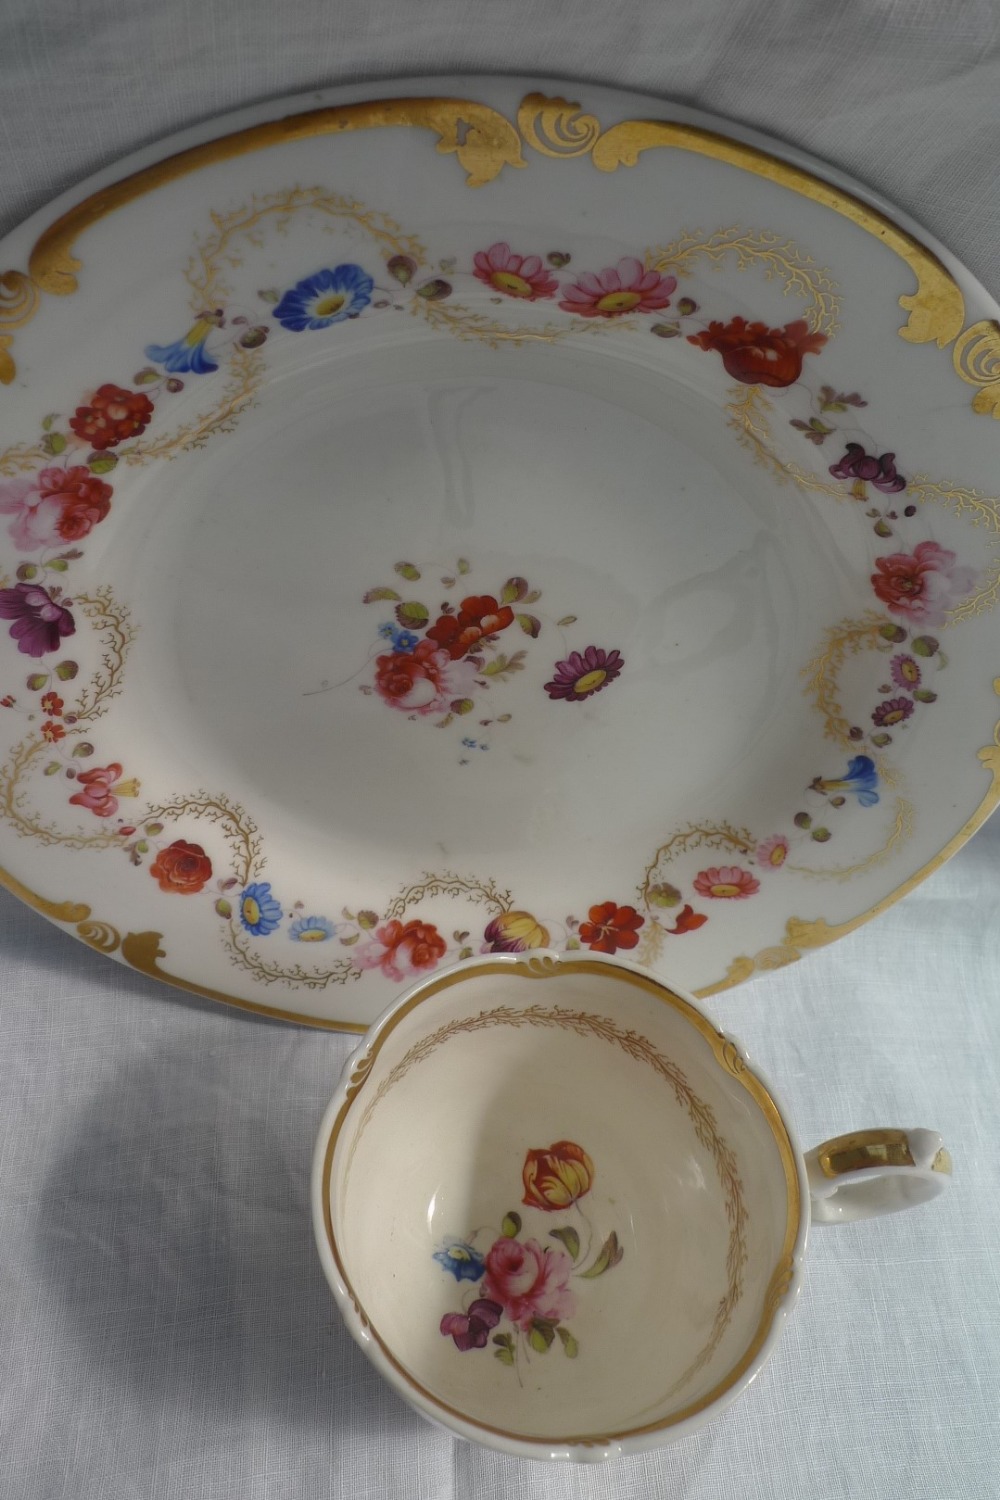 A 19th century English porcelain plate, the edge with gilt scrolling decoration, - Image 2 of 3